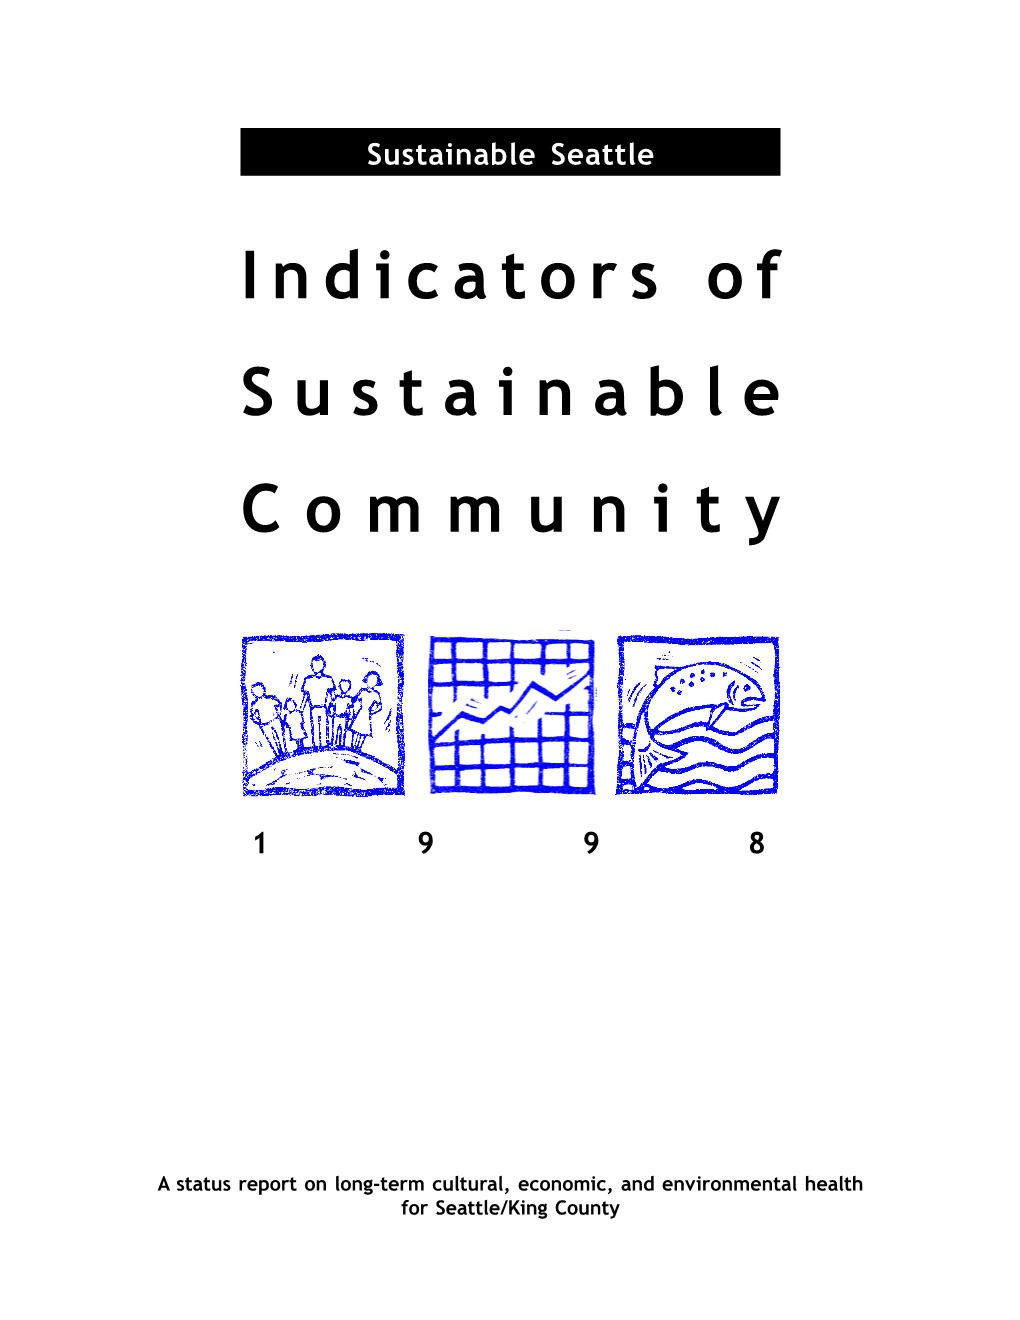 Indicators for a Sustainable Community